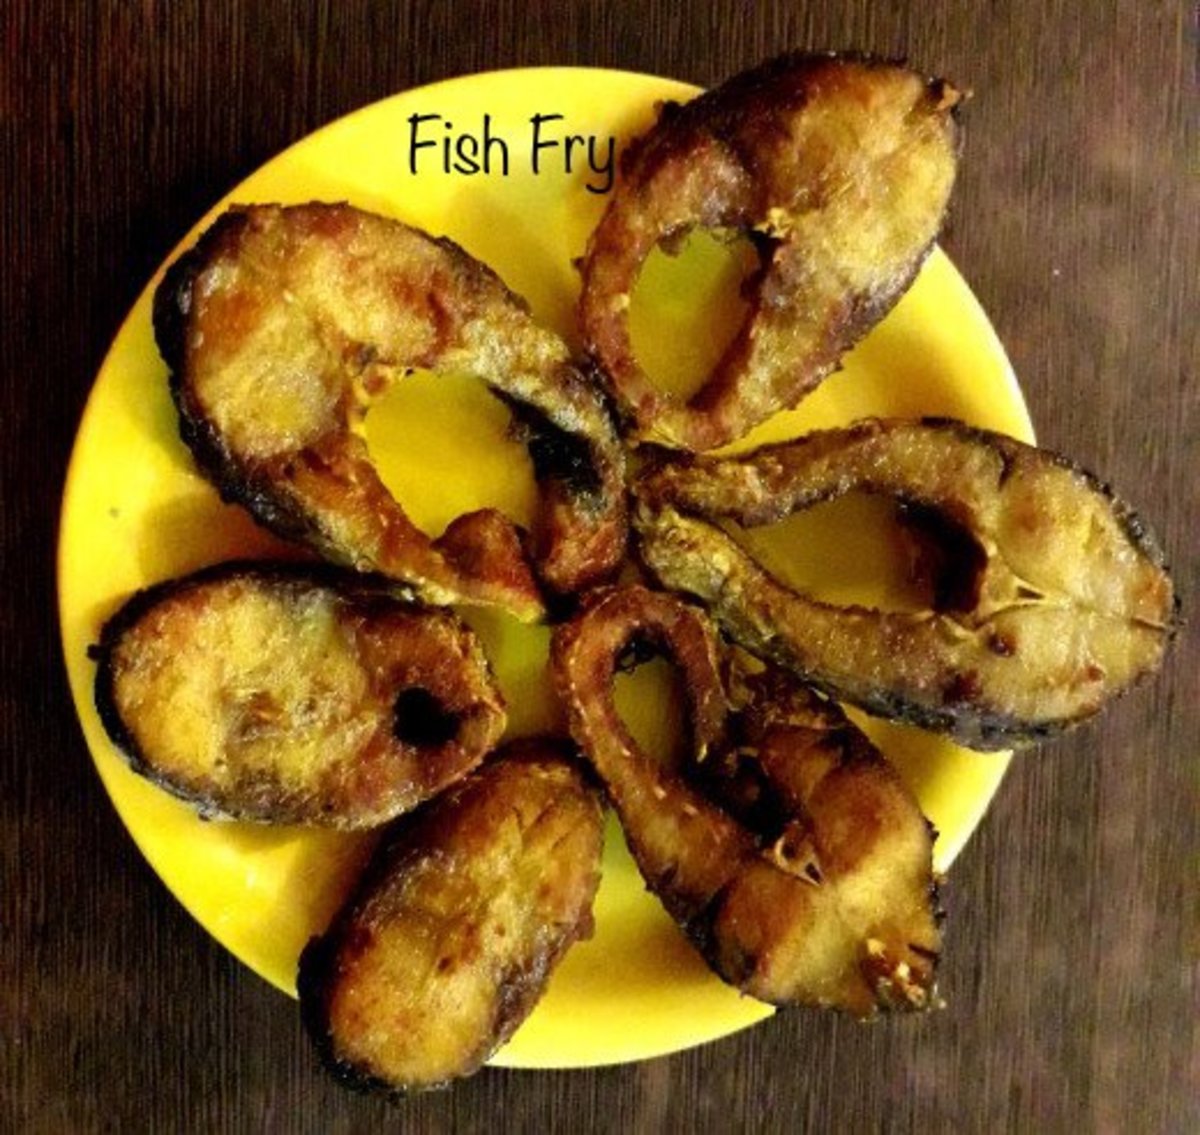 Rohu is a freshwater fish that makes a delightful fried snack or appetizer.